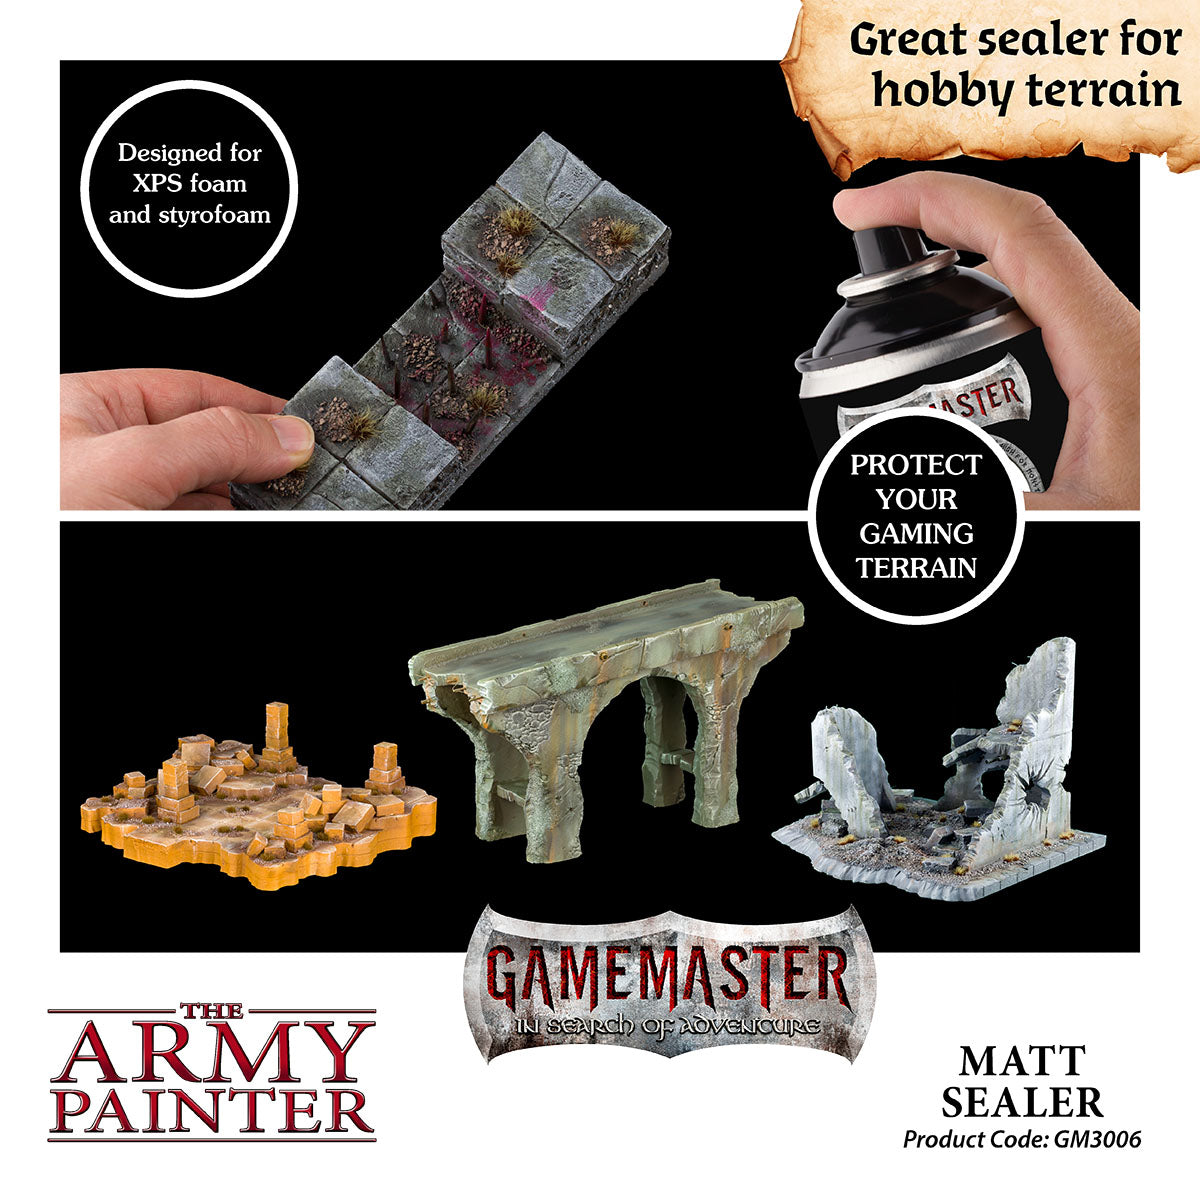 Army Painter Primer: Army Green